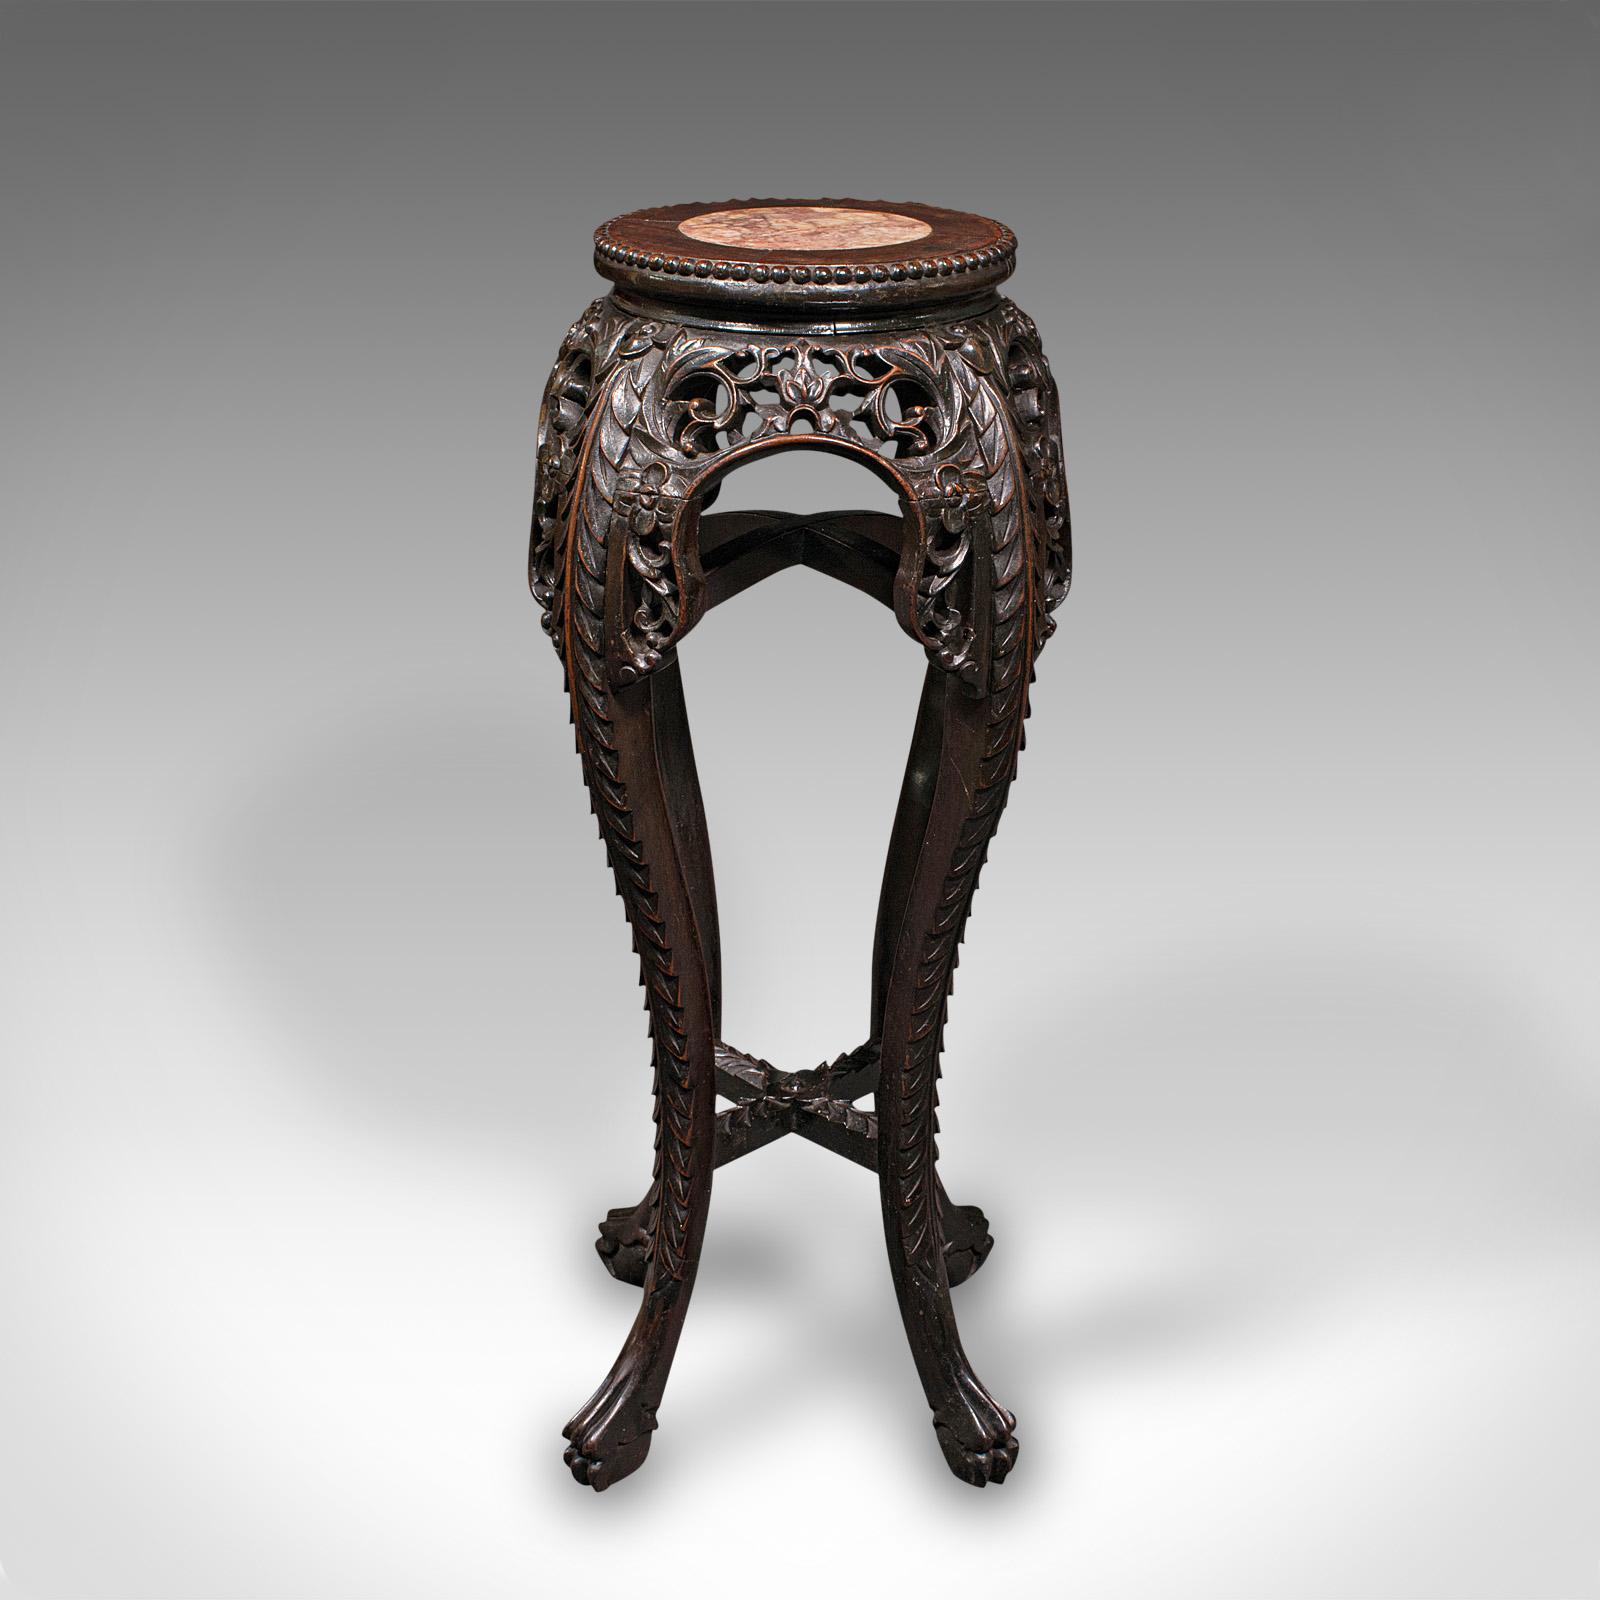 This is an antique jardiniere stand. A Chinese, rosewood and marble planter stand or lamp table, dating to the late Victorian period, circa 1900.

Strikingly carved appearance with an appealing marble top
Displays a desirable aged patina and in good